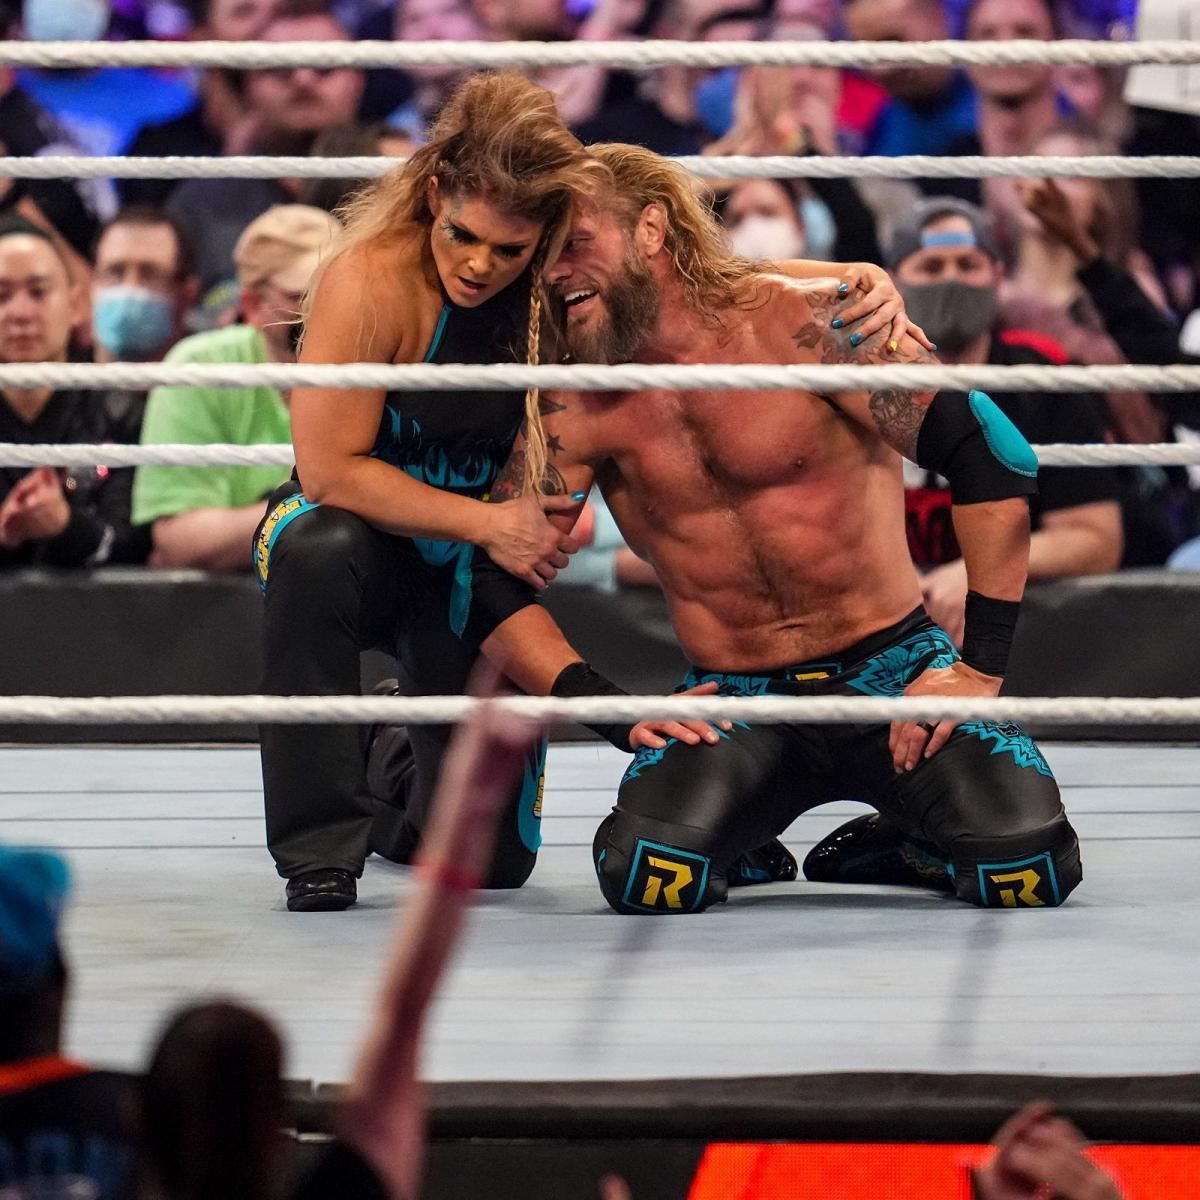 Beth and Edge celebrate their victory at the Royal Rumble